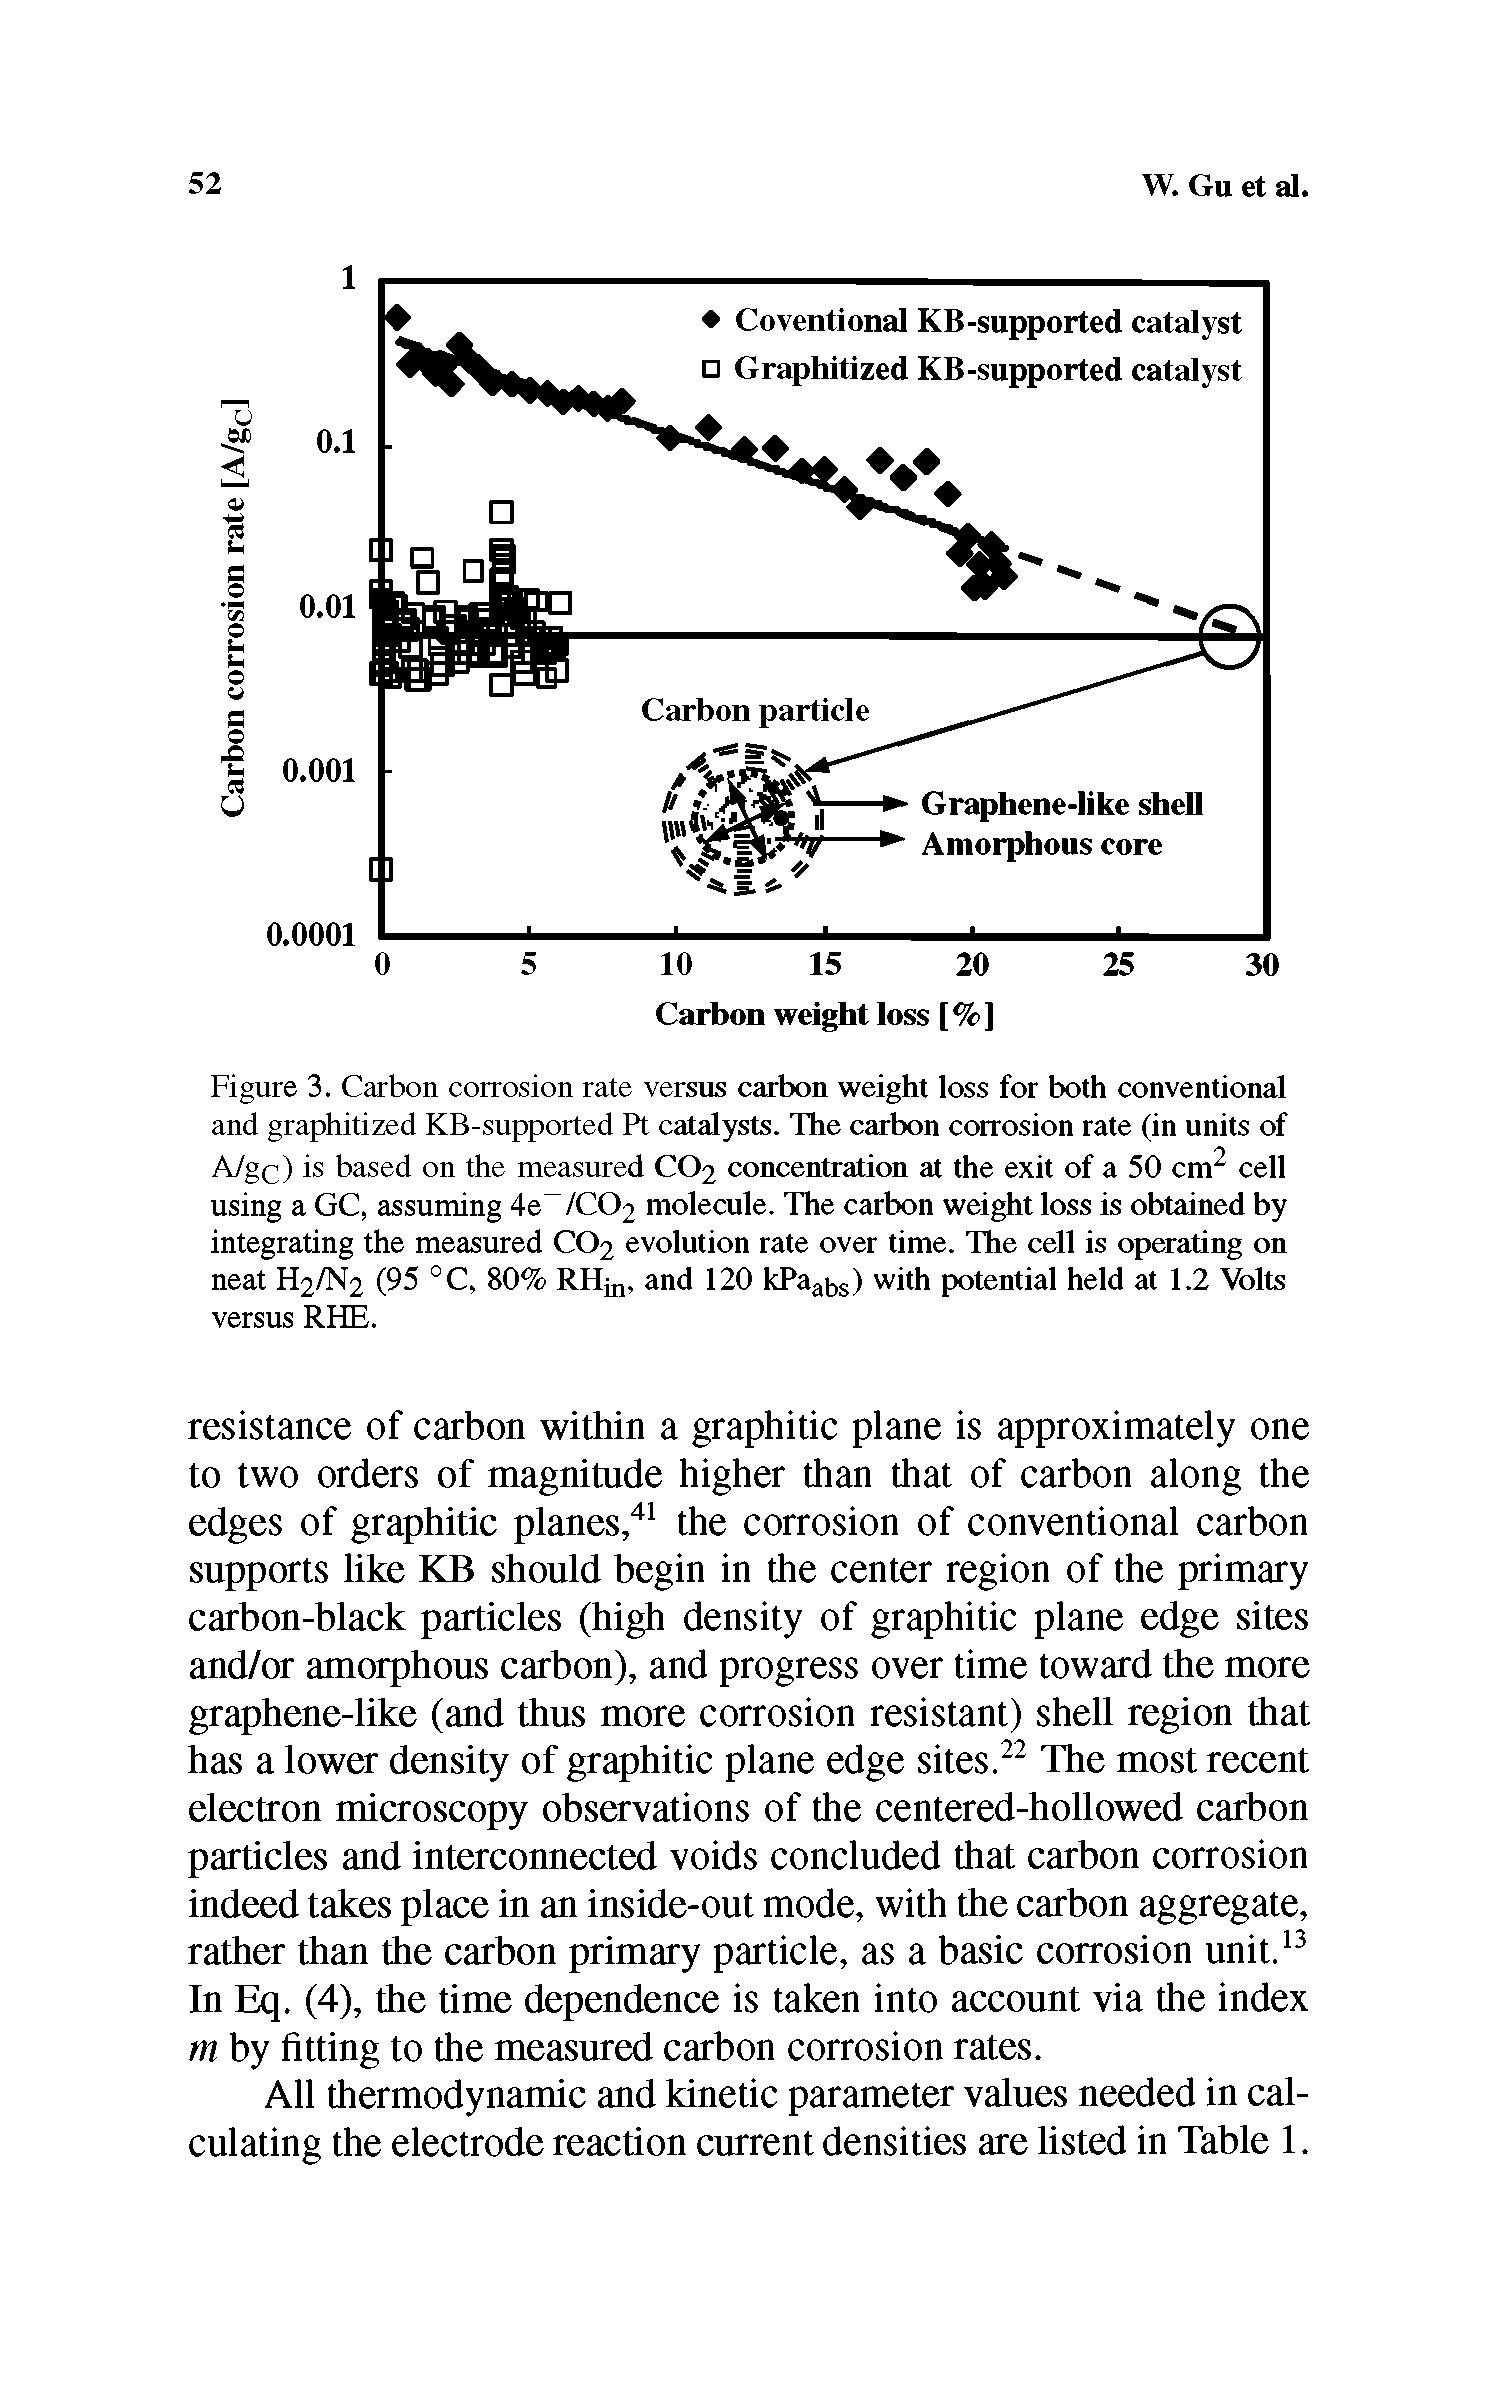 Figure 3. Carbon corrosion rate versus carbon weight loss for both conventional and graphitized KB-supported Pt catalysts. The carbon corrosion rate (in units of A/g( ) is based on the measured CO2 concentration at the exit of a 50 cnr cell using a GC, assuming 4e /( (T molecule. The carbon weight loss is obtained by integrating the measured CO2 evolution rate over time. The cell is operating on neat H2/N2 (95 °C, 80% RIIjn, and 120 kPaa, s) with potential held at 1.2 Volts versus RHE.